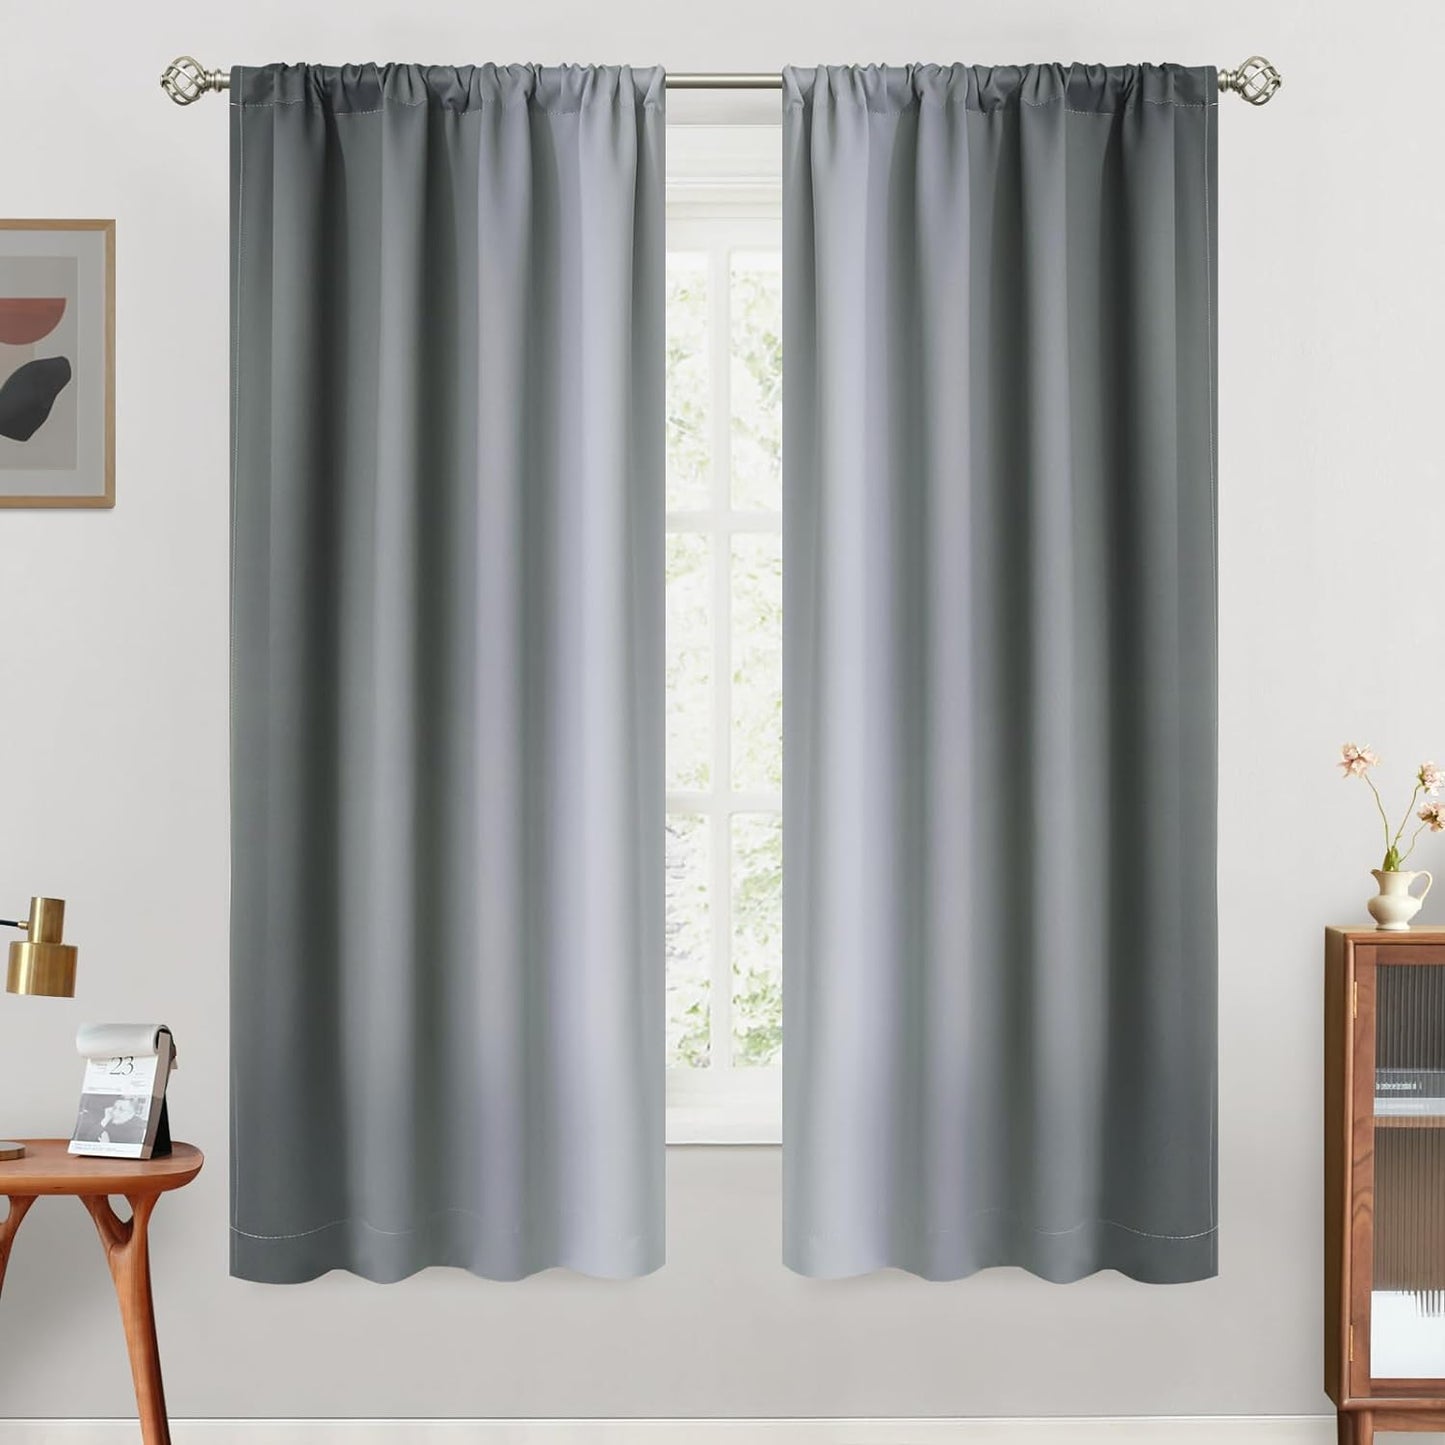 Simplehome Ombre Room Darkening Curtains for Bedroom, Light Blocking Gradient Purple to Greyish White Thermal Insulated Rod Pocket Window Curtains Drapes for Living Room,2 Panels, 52X84 Inches Length  SimpleHome Grey 42W X 63L / 2 Panels 